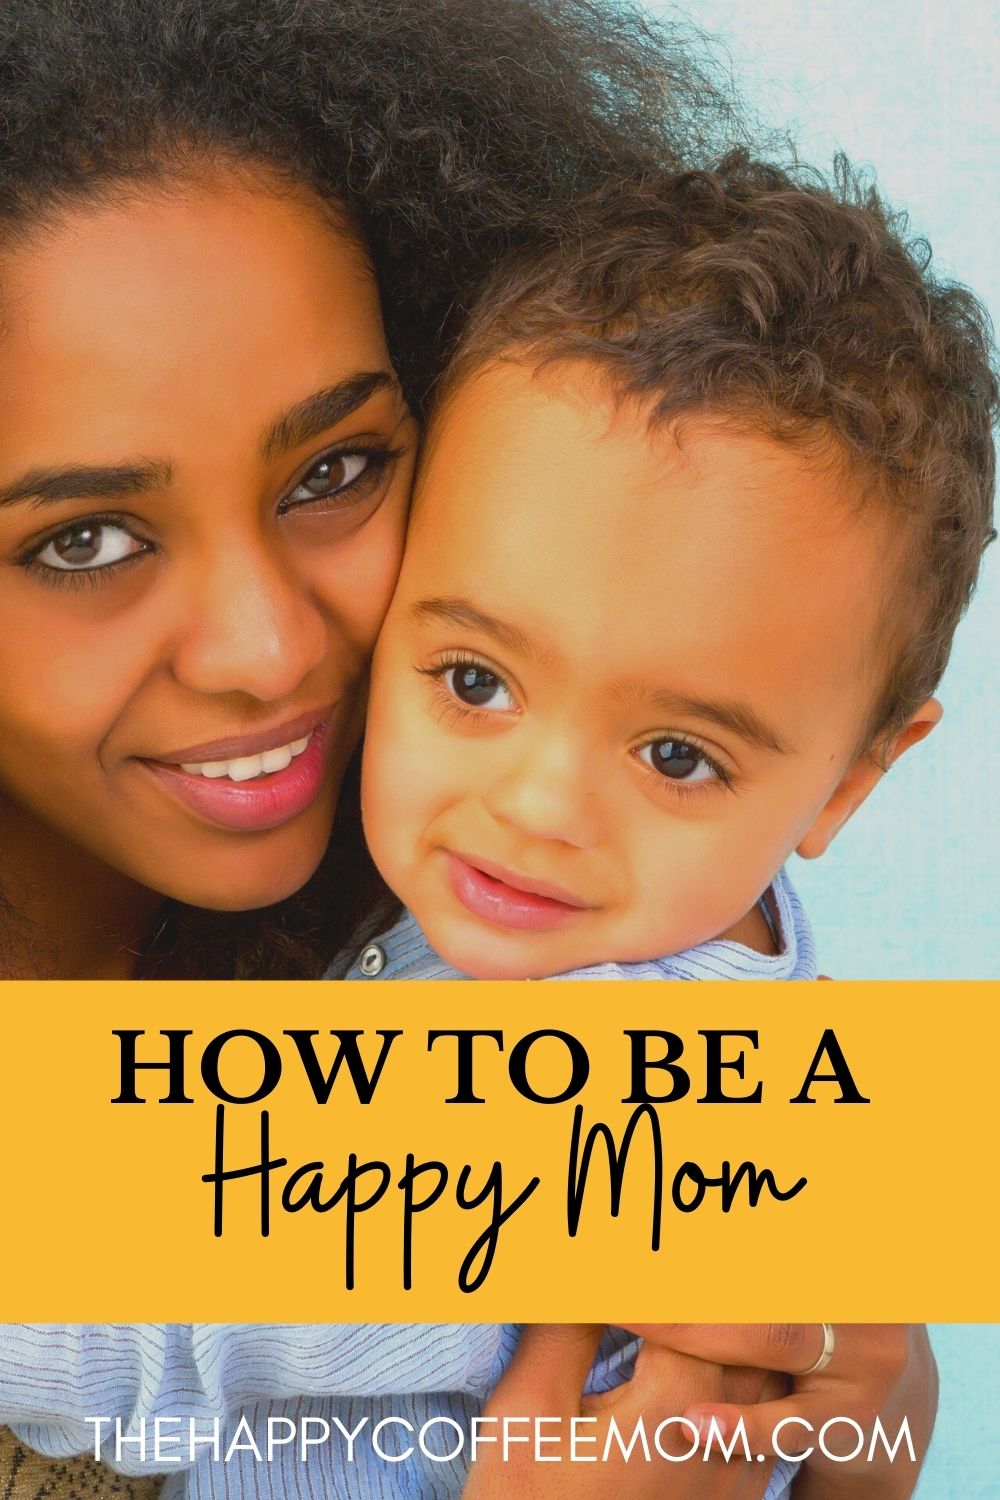 How to Be a Happy Mom